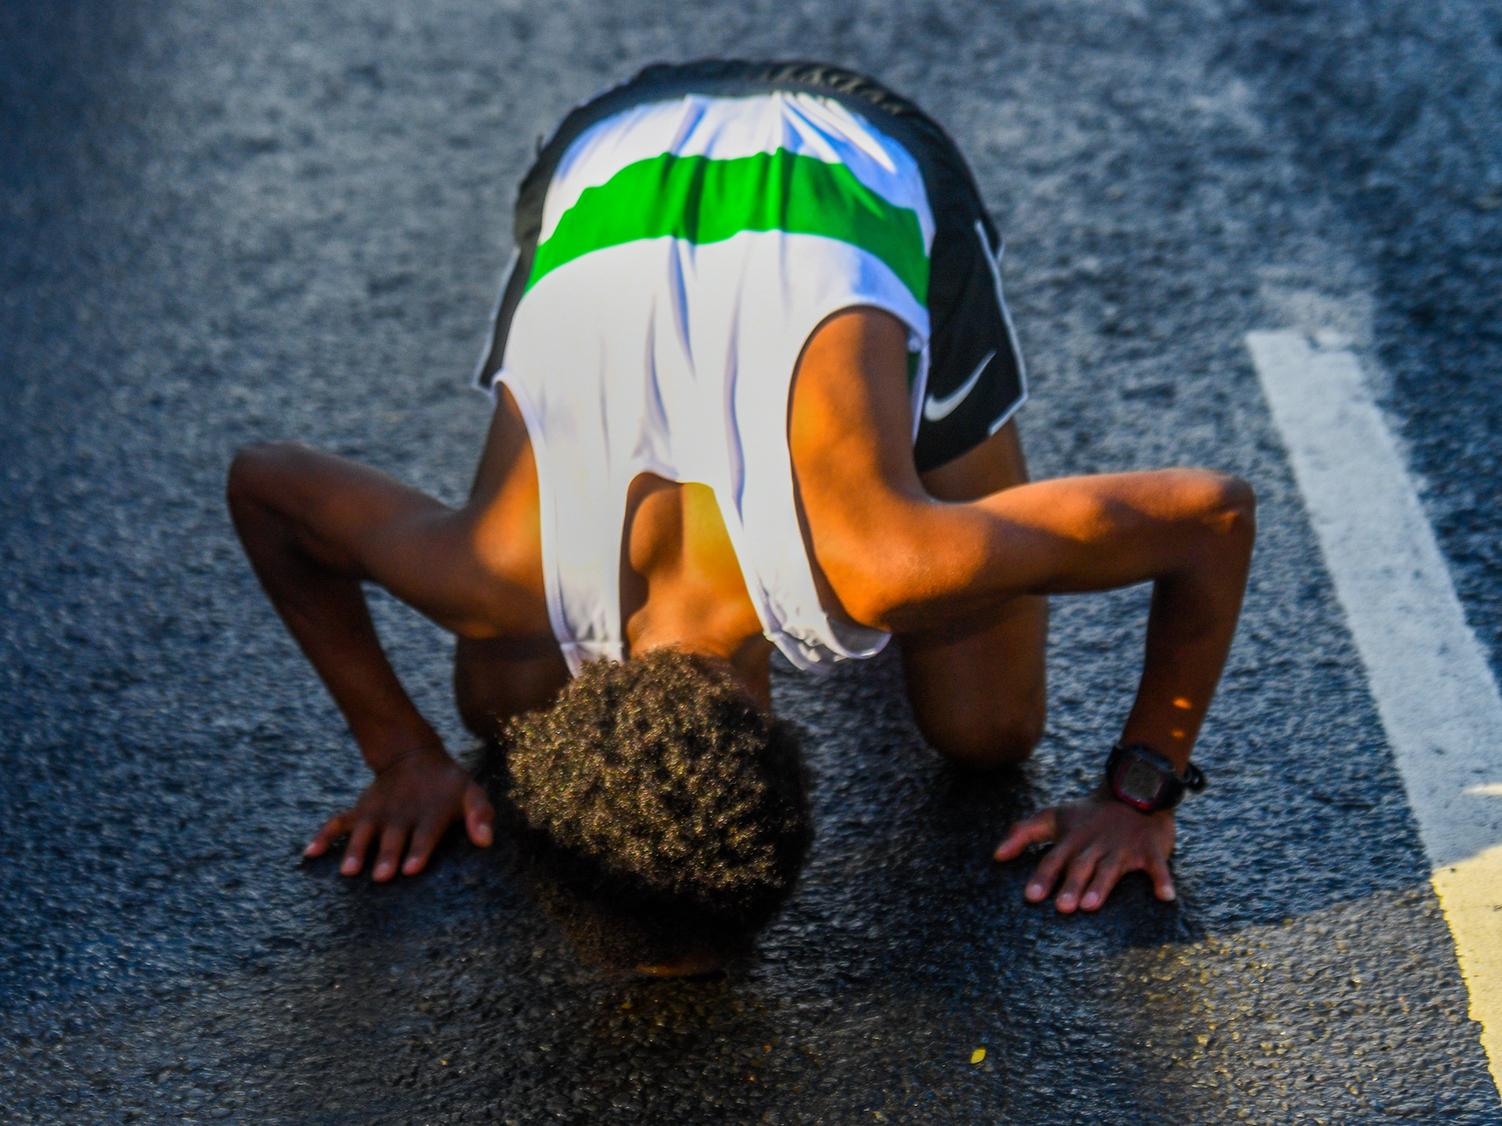 Omar Ahmed was overjoyed to be the first male runner to cross the finish line.